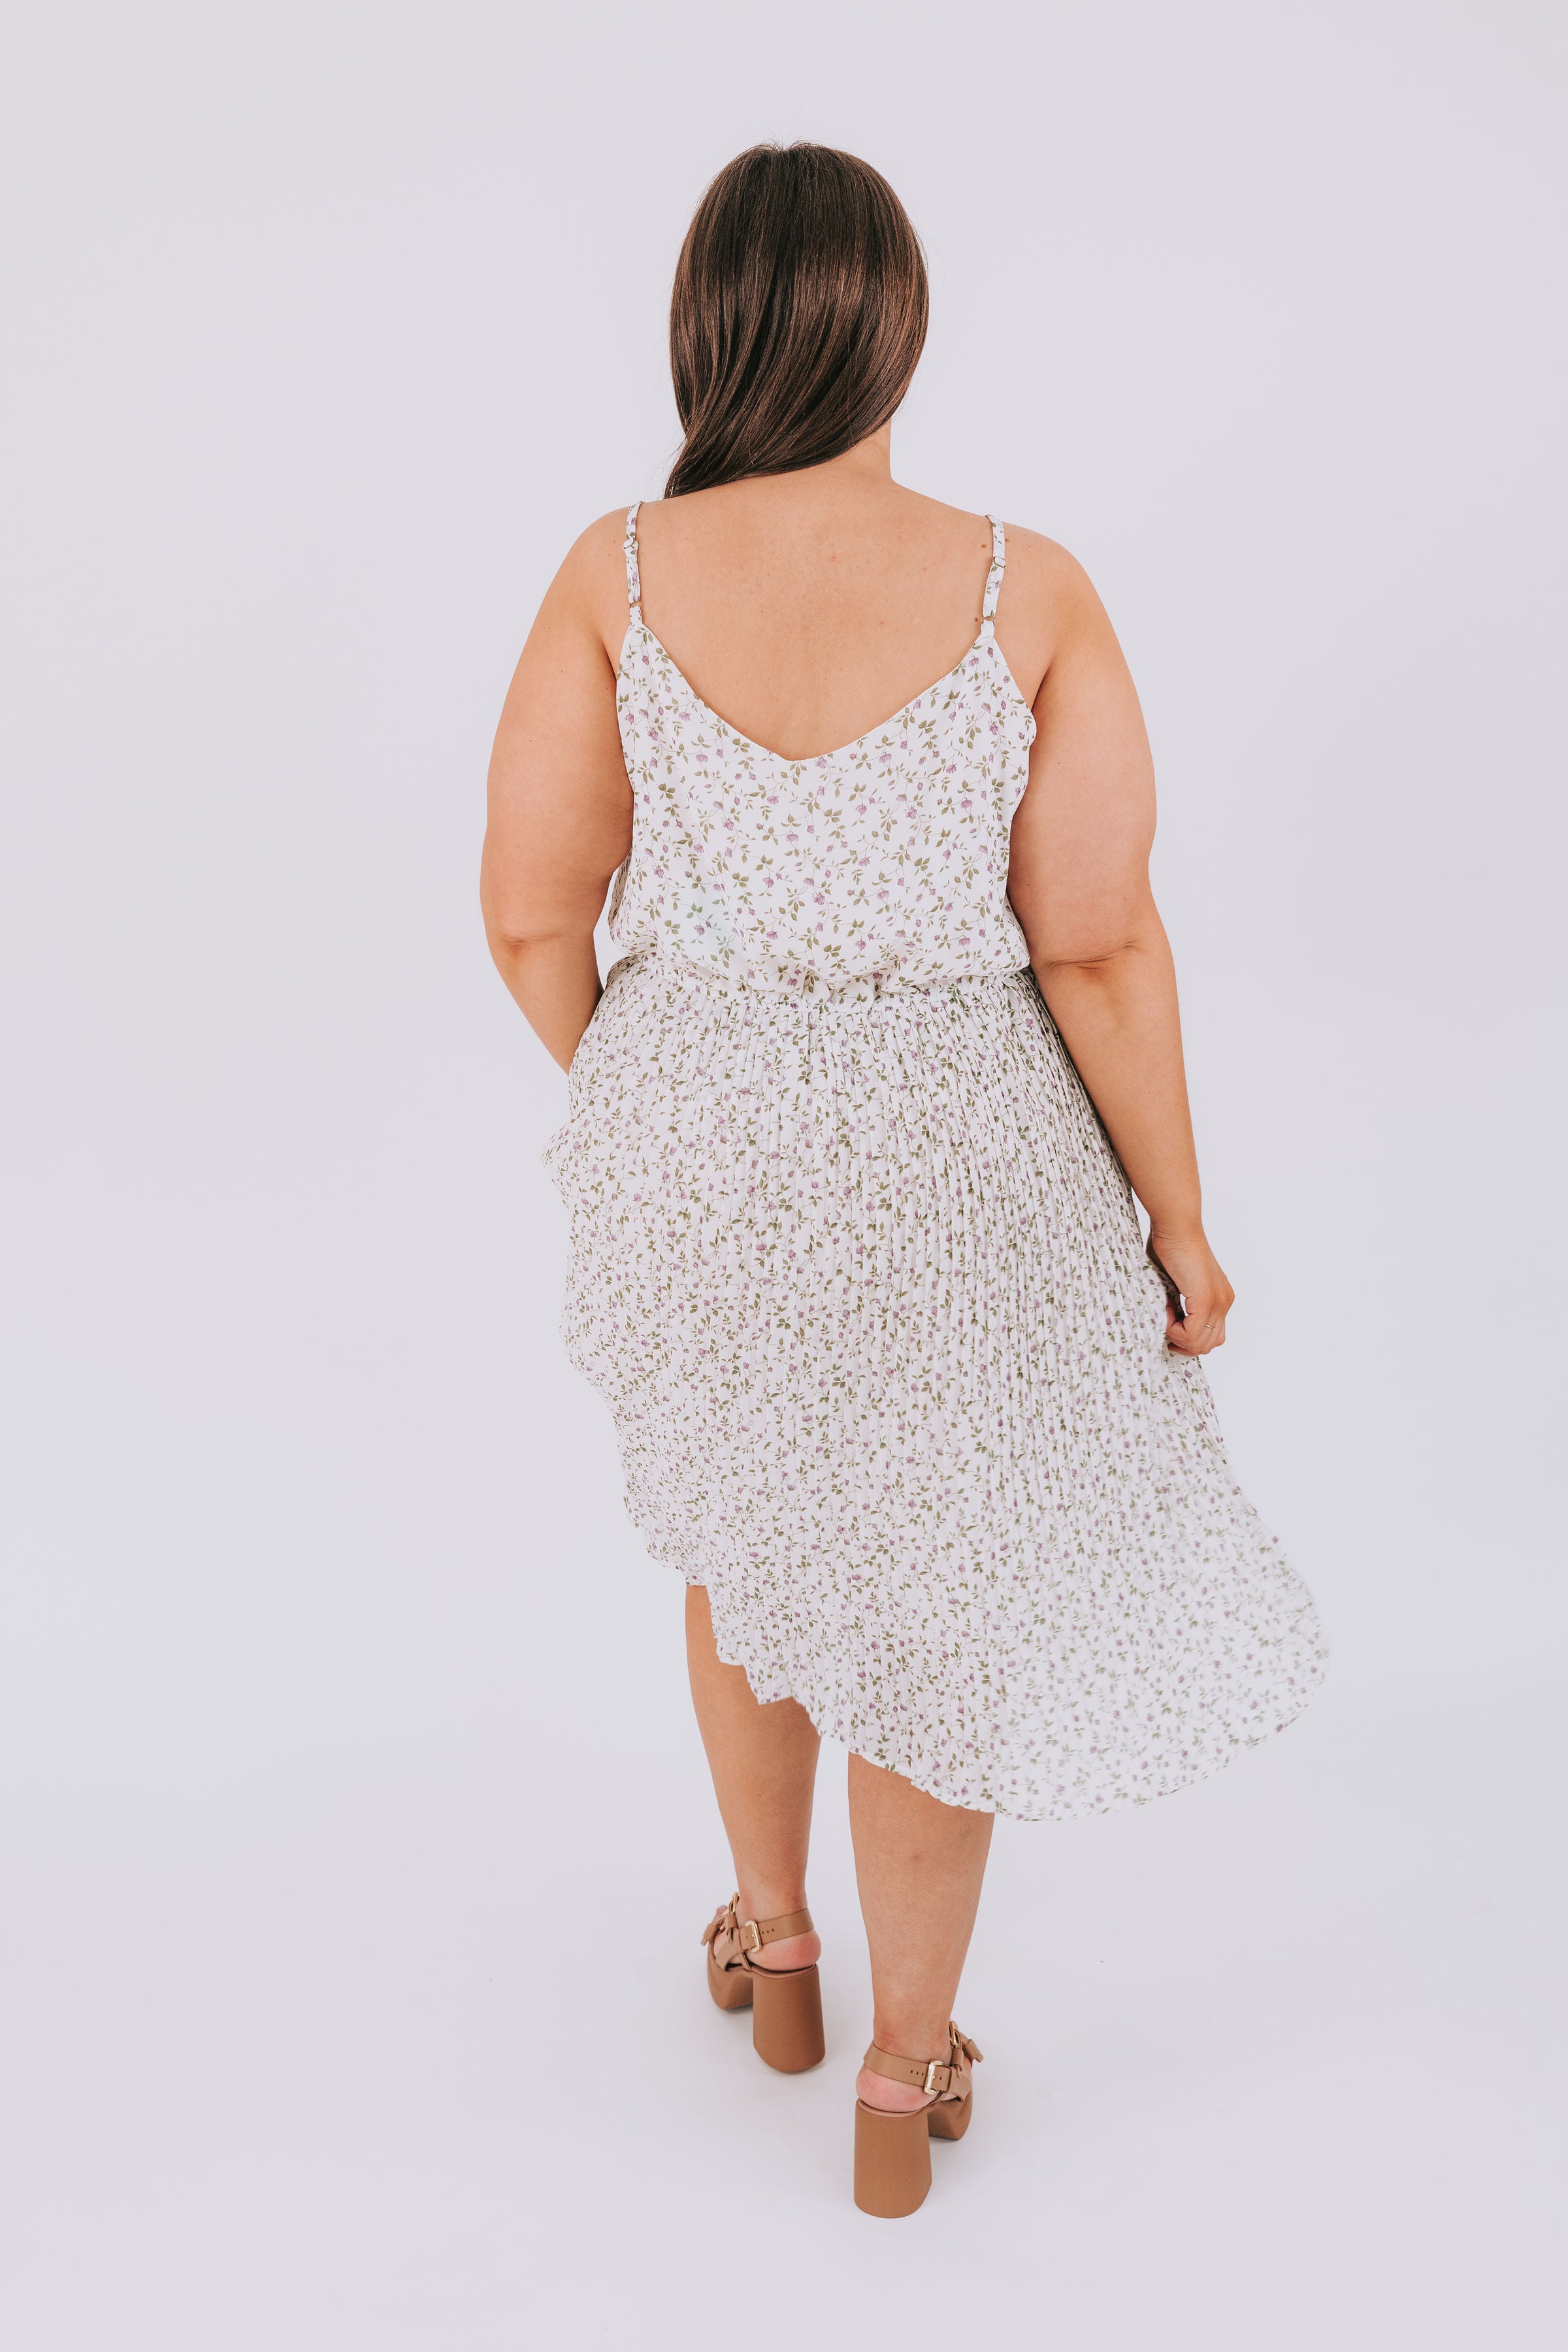 PLUS SIZE - For Now Dress